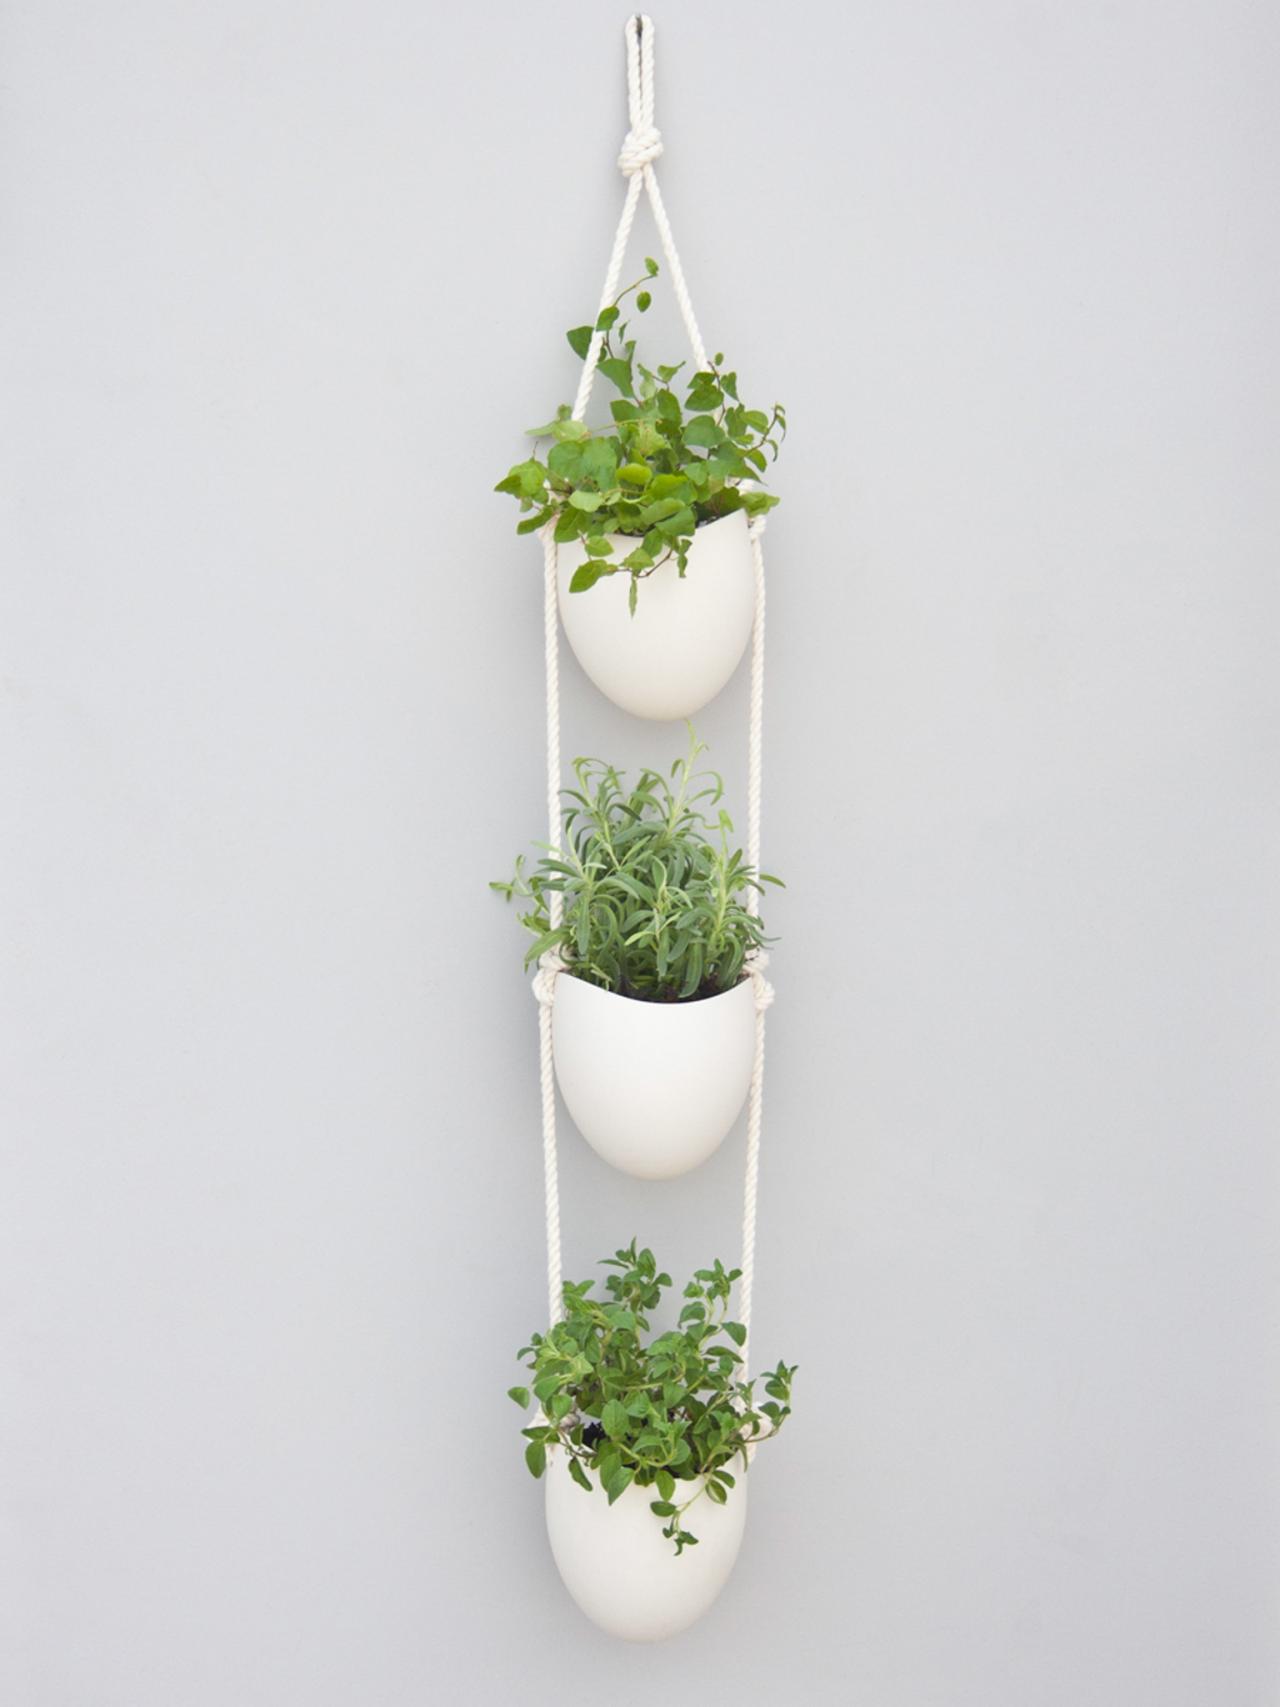 The hanging herb